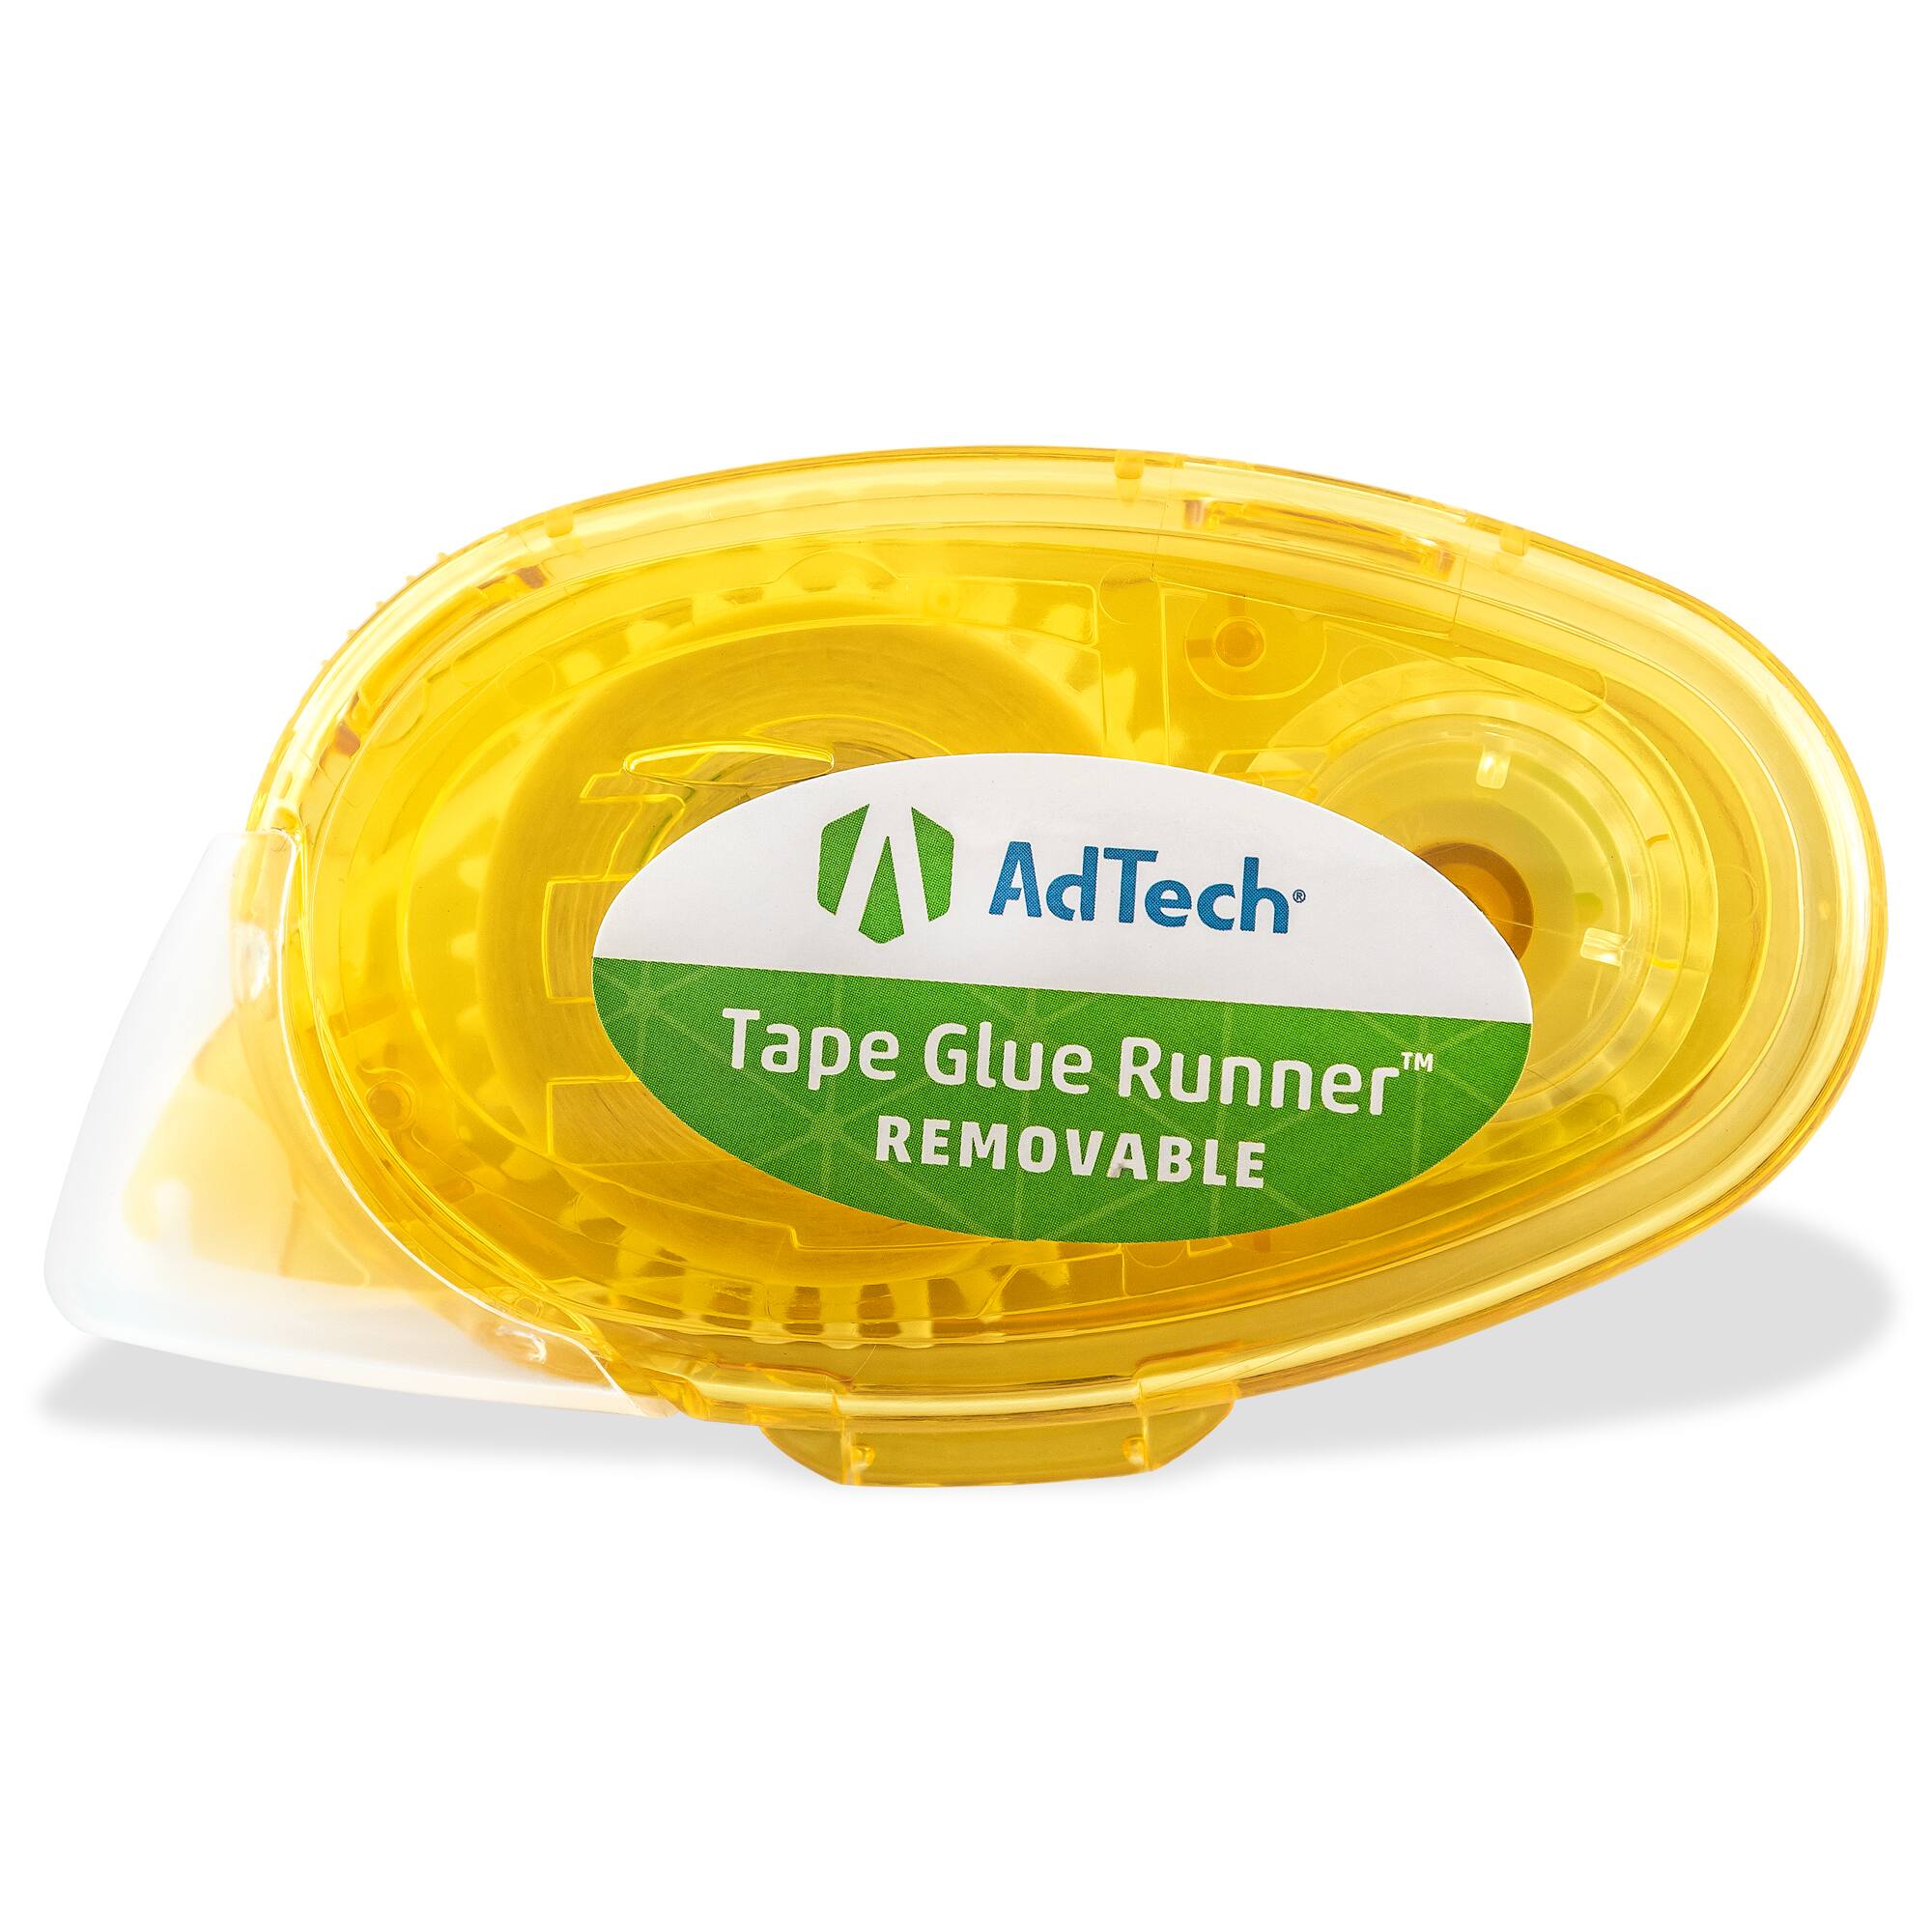 12 Packs: 4 ct. (48 total) AdTech® Removable Tape Glue Runner™ 